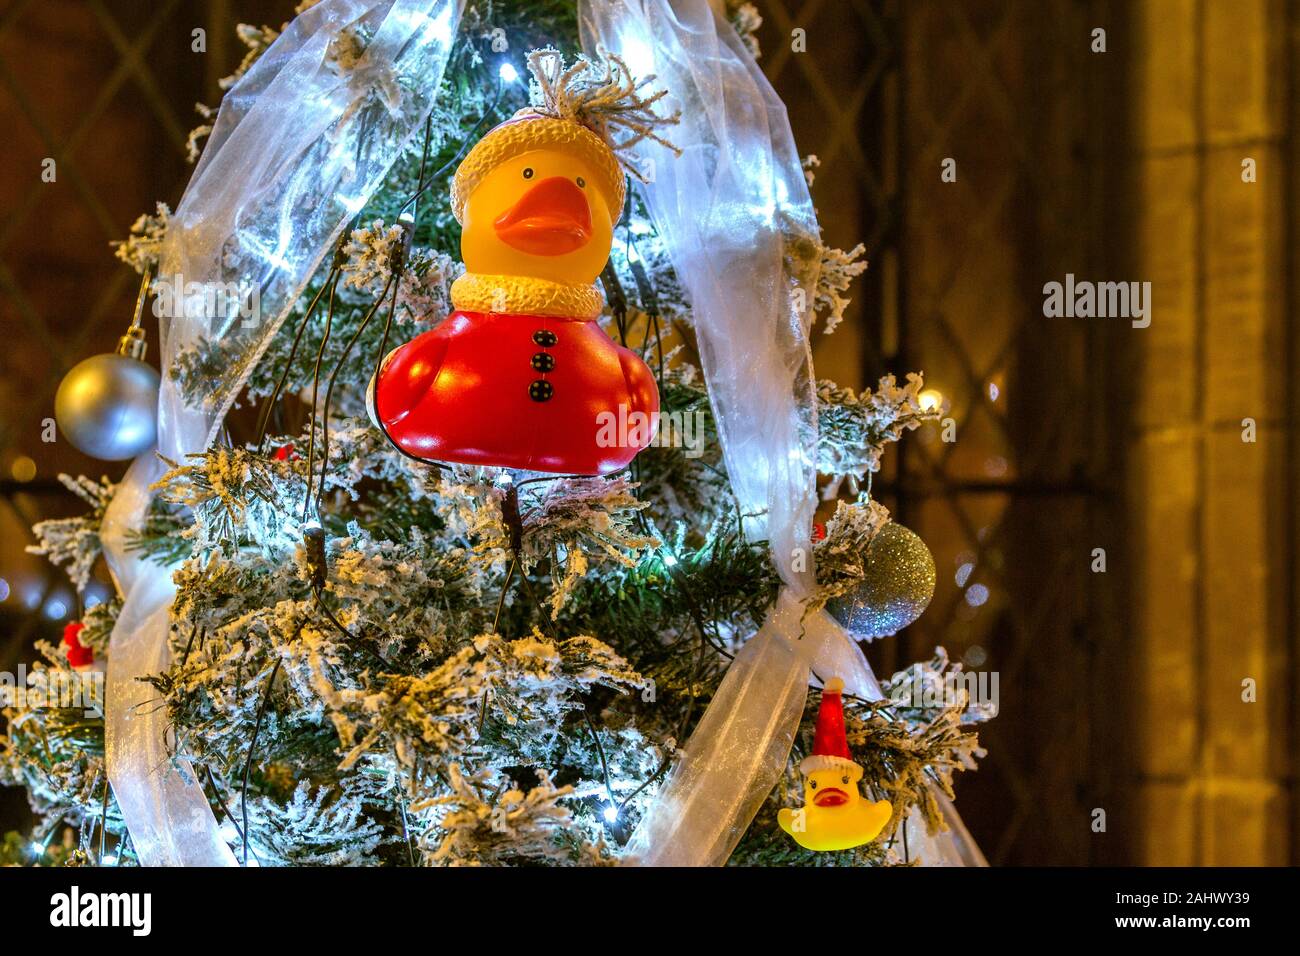 Rubber duck Santa. Non traditional Christmas tree decoration on a snow covered Christmas tree. Stock Photo